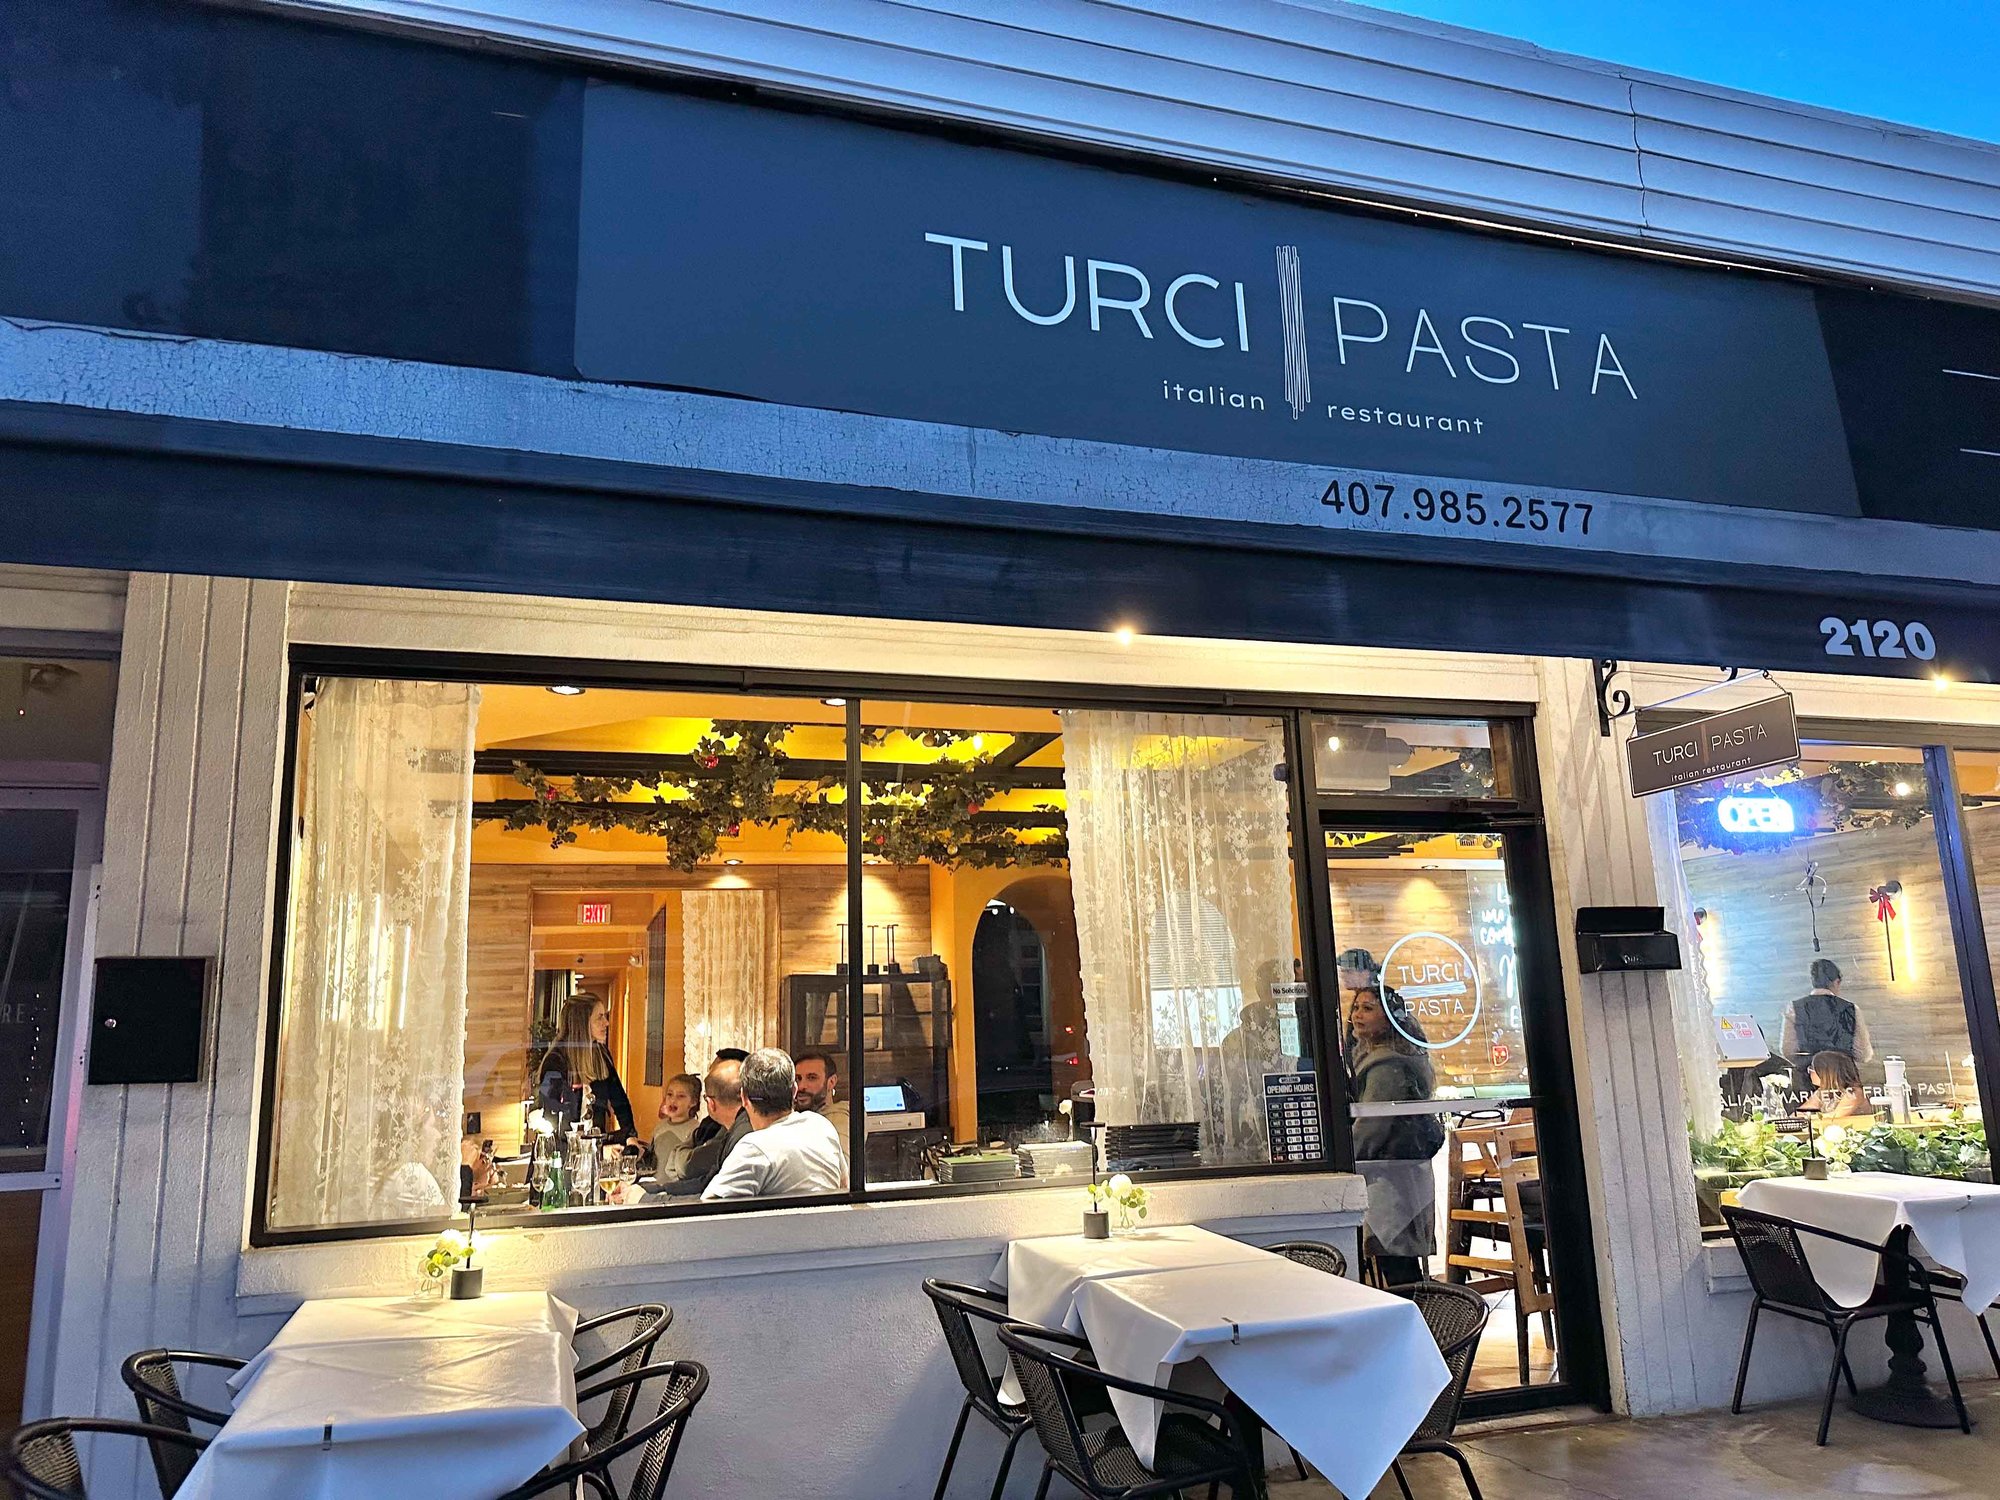 front of turci pasta building with glass windows and a black sign